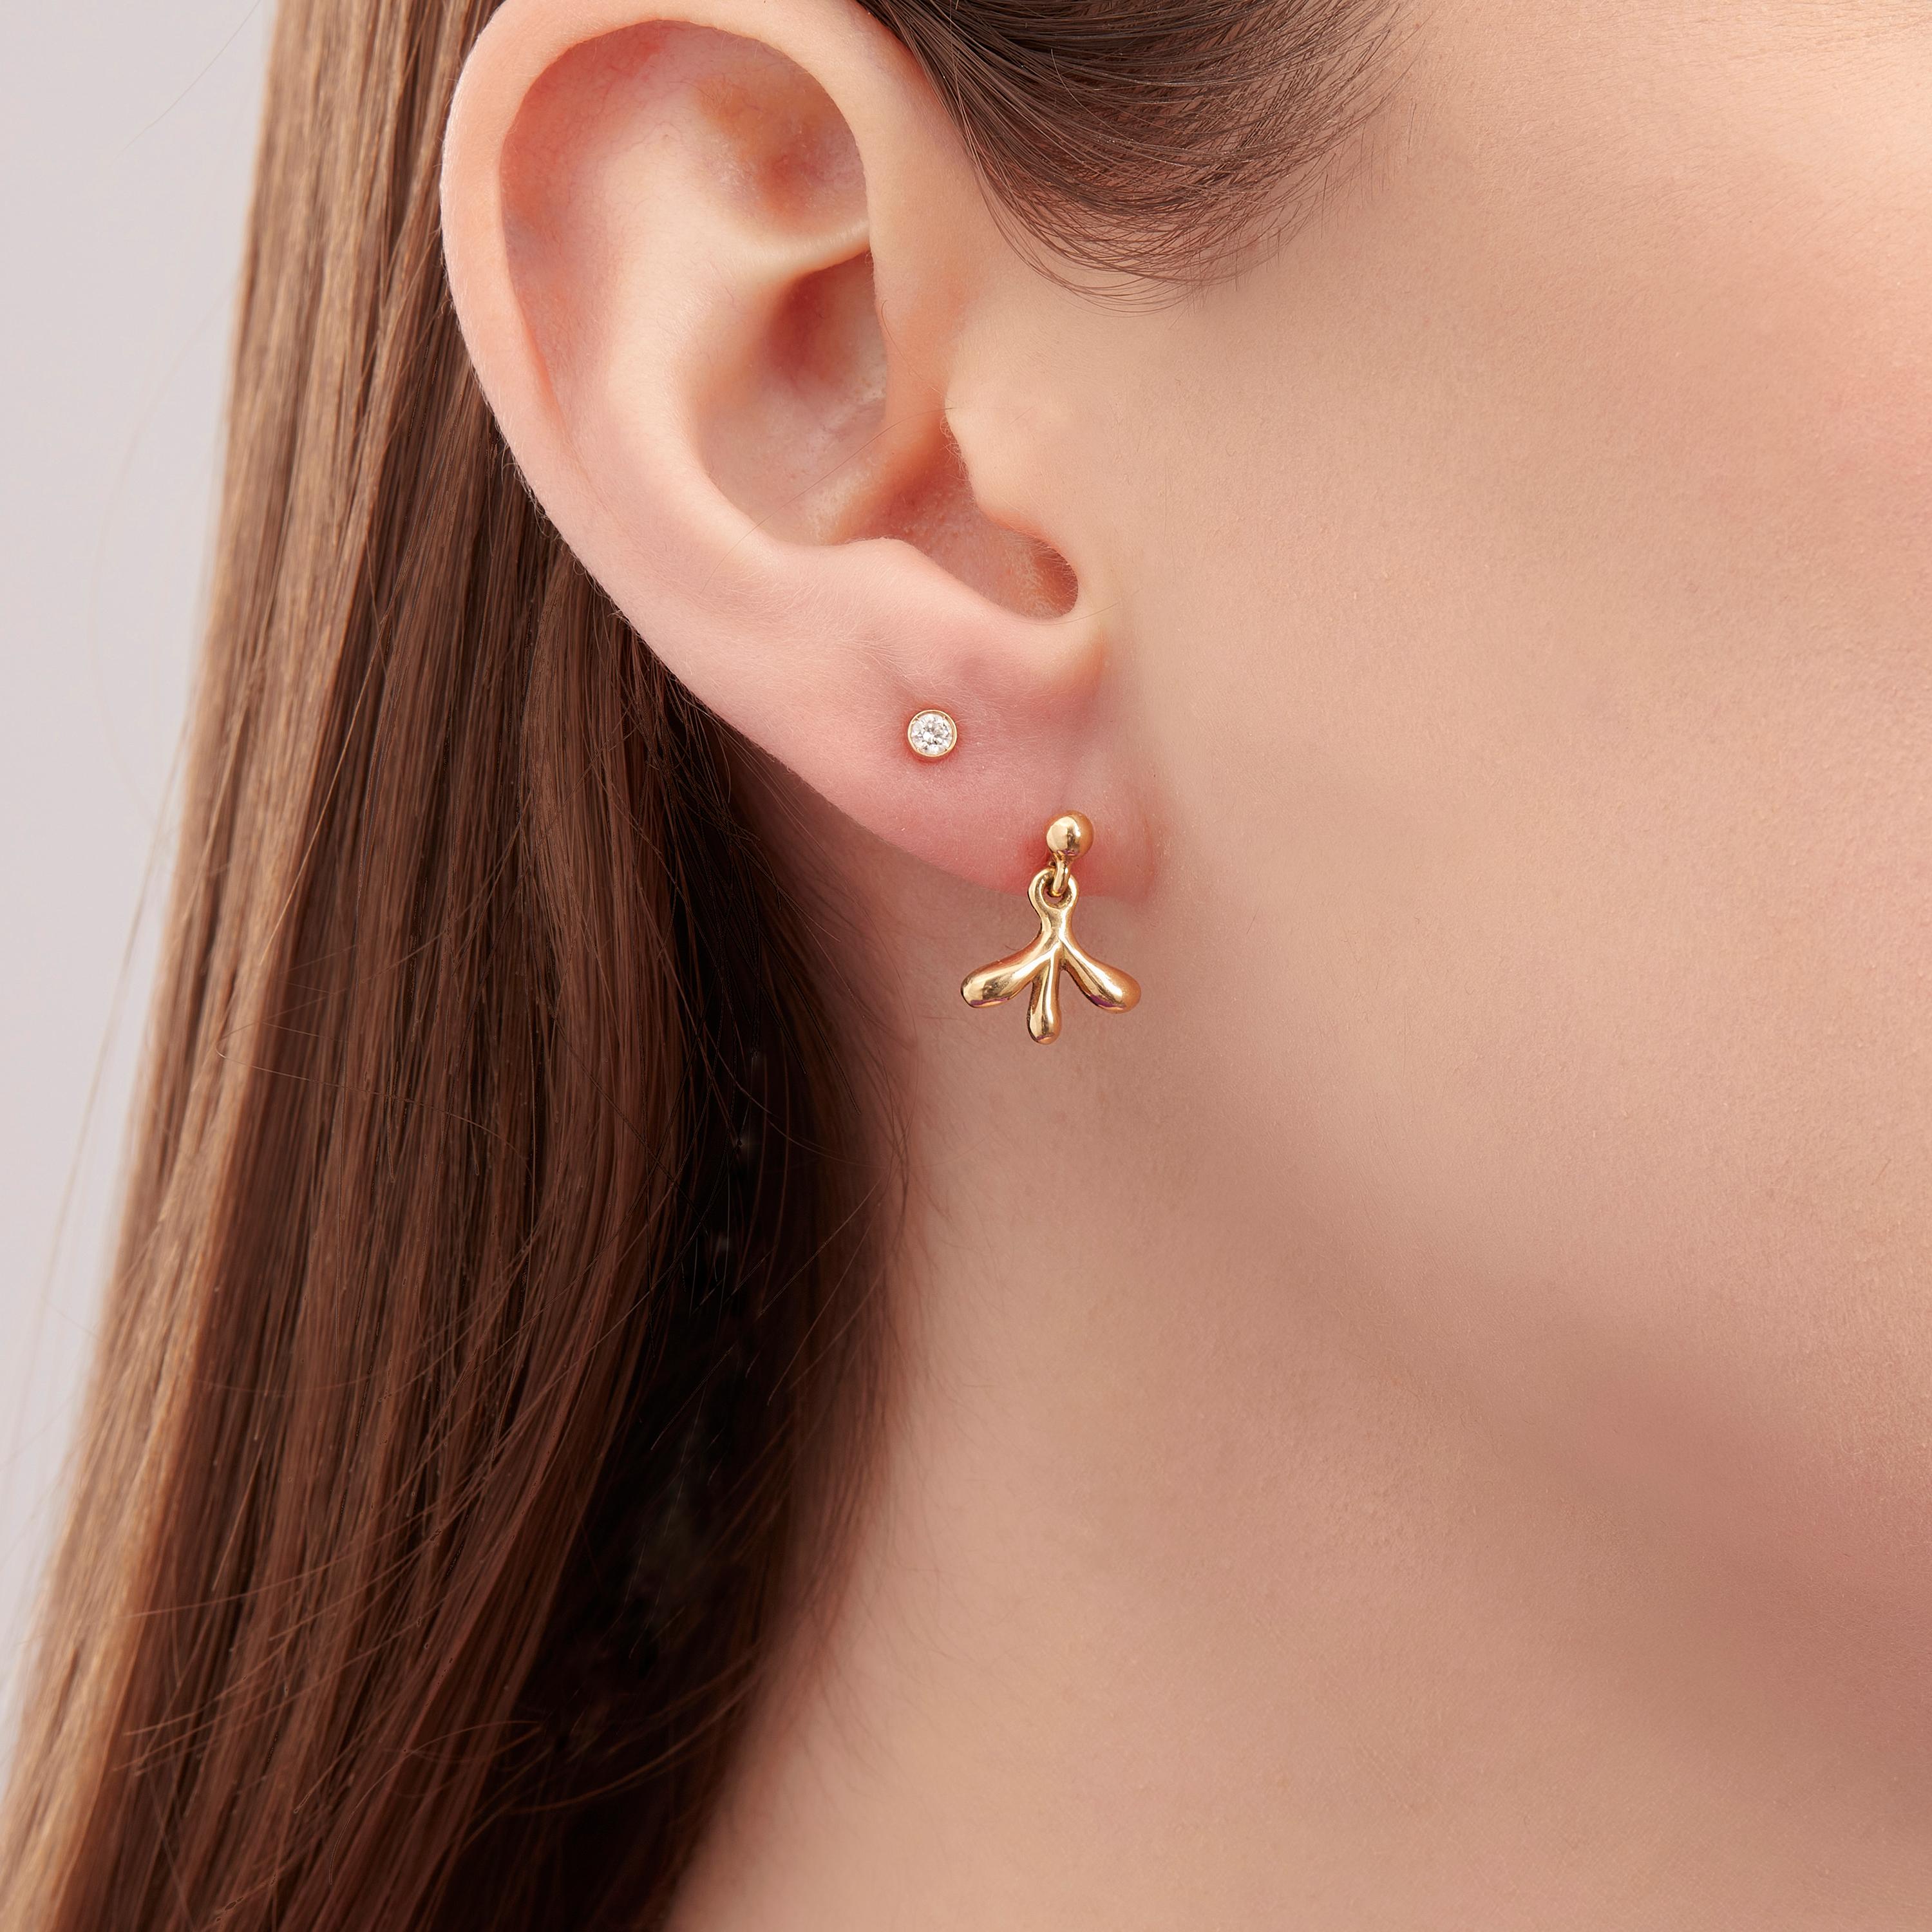 Springing forth from a lush magical wilderness are the JungleRemix Earrings with their clusters of gold leaves with well-rounded tips jingling and jangling to mimic the swaying movements of exotic flora in the heart of the rainforest. Cast as